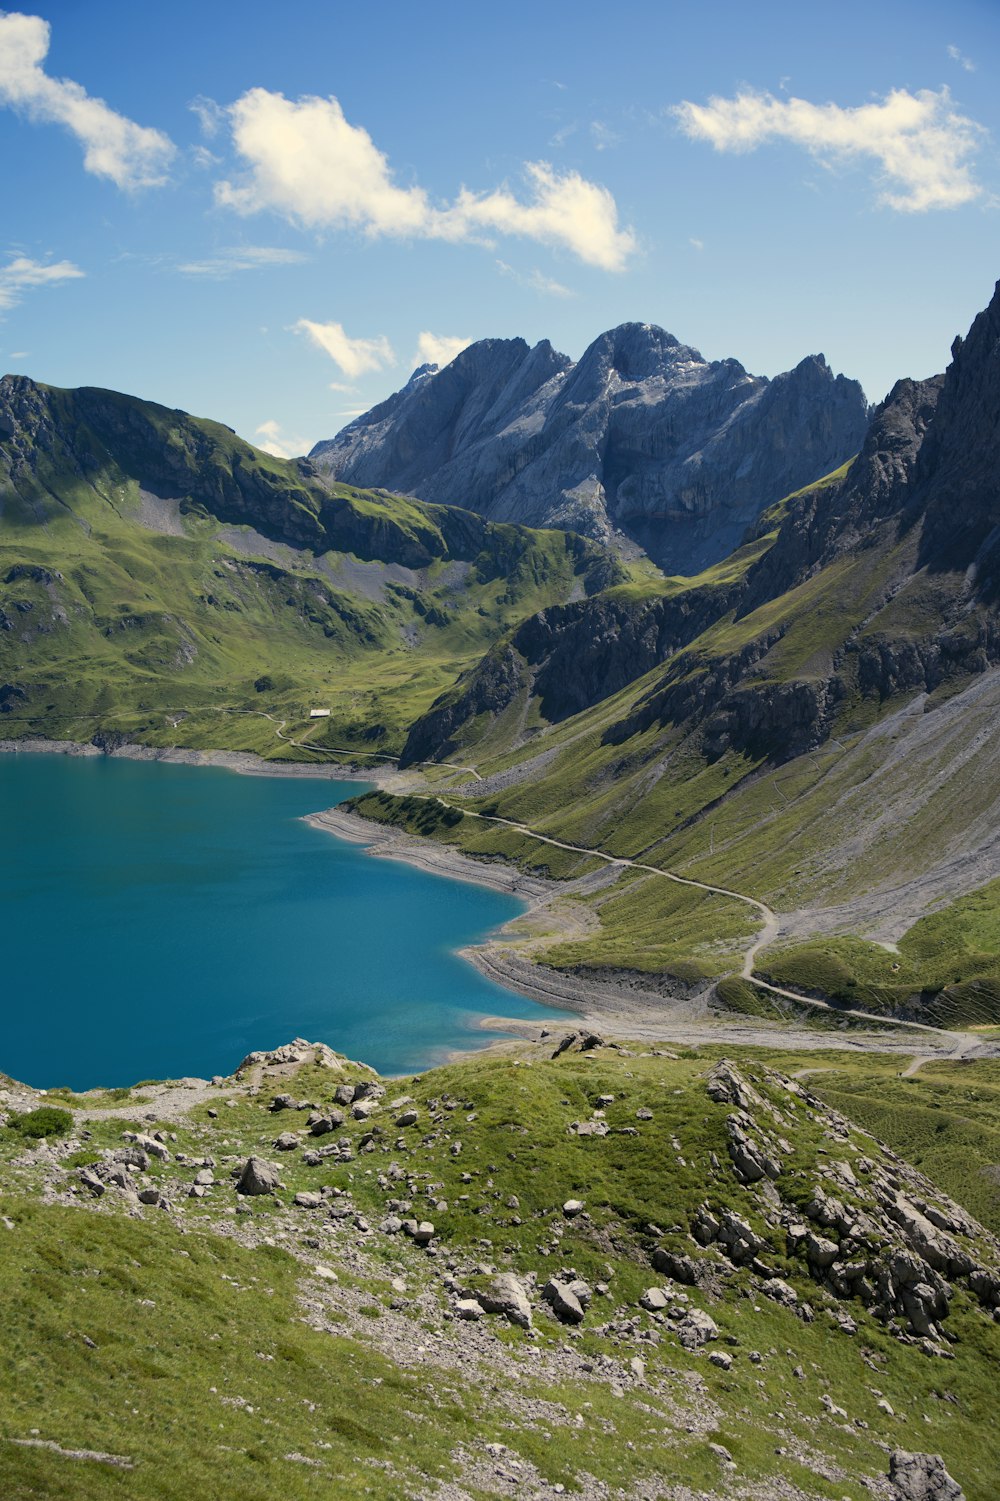 a blue lake surrounded by mountains under a blue sky